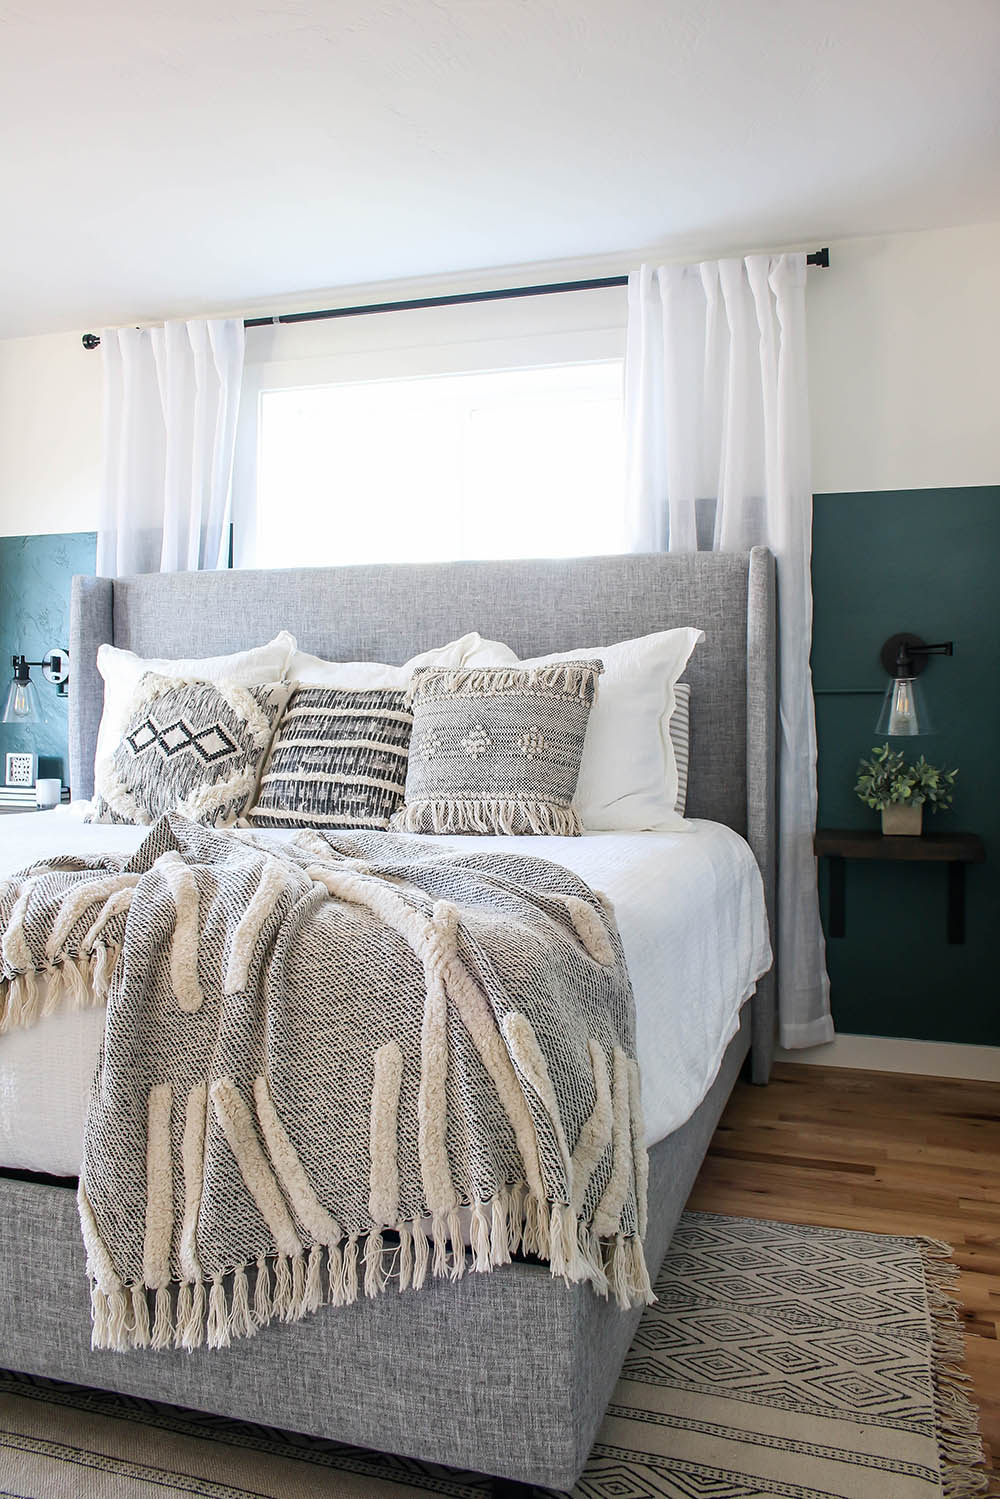 A bedroom with wood flooring, a grey and white rug, a bed with a white comforter, throw pillows and a blanket, two sconces, a window with white drapes, and dark green and white walls.